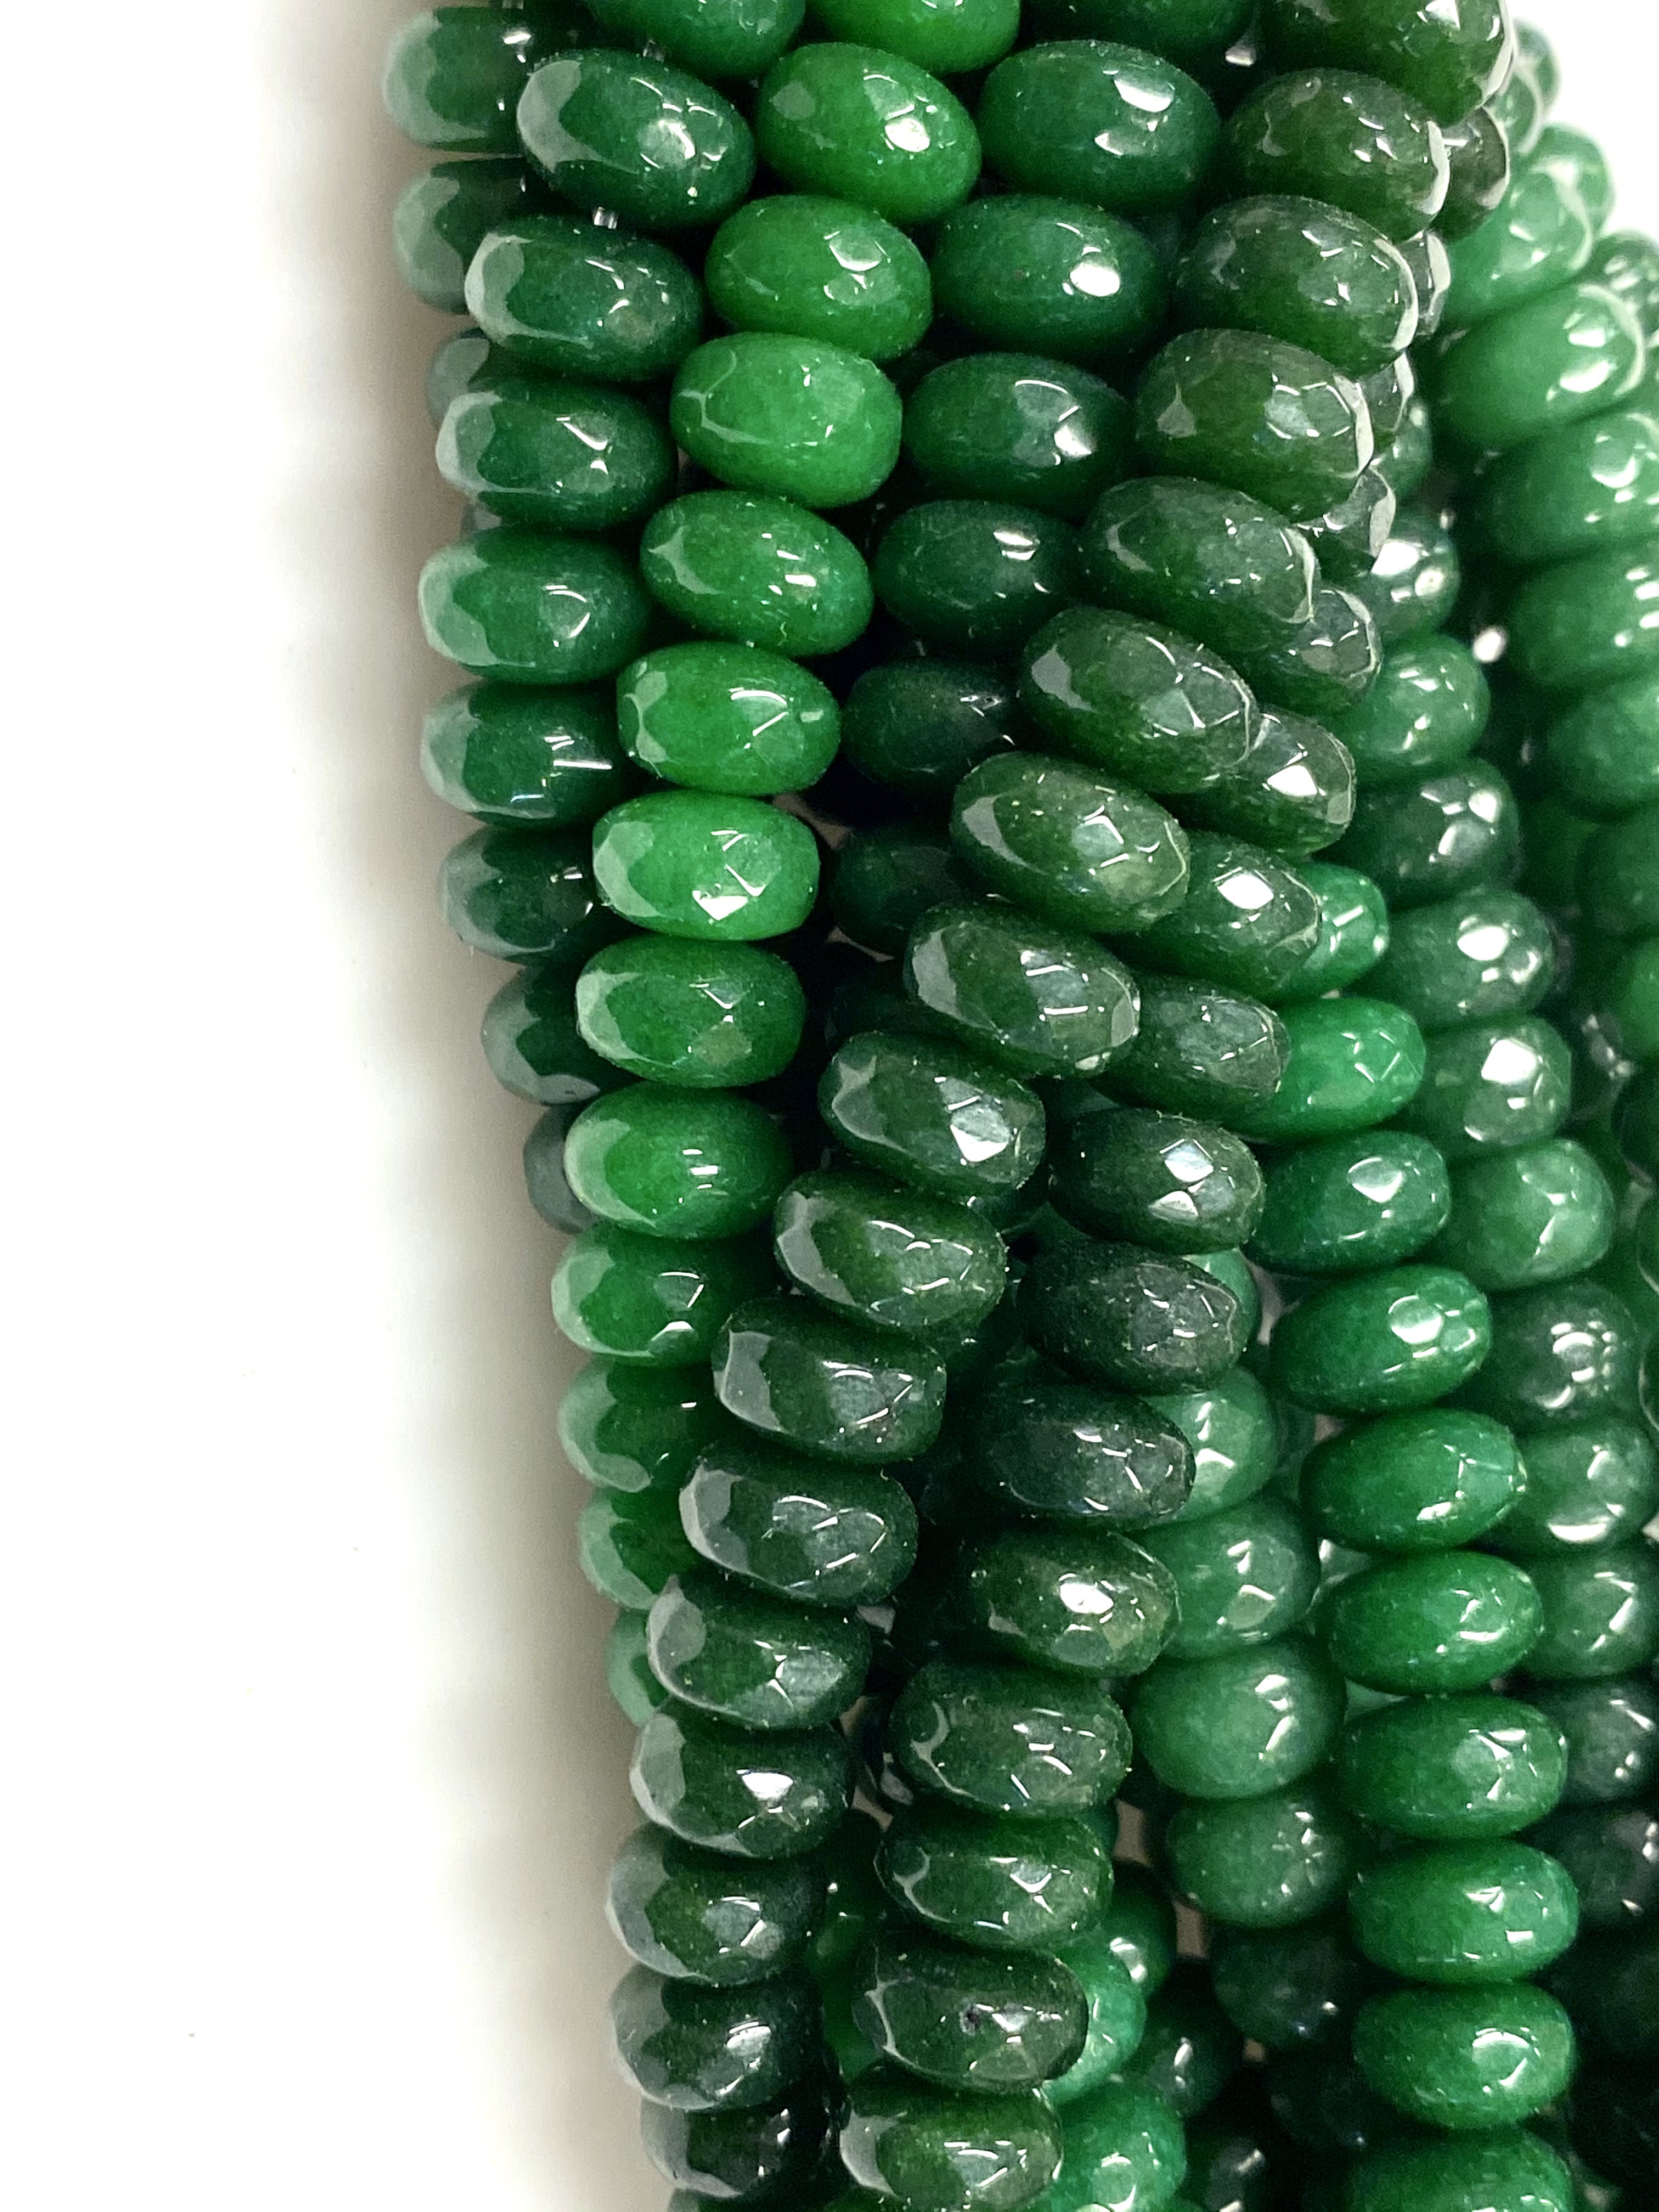 Gemstone Faceted Beads for Jewelry Making Gemstones Loose Beads Green Jade  Stone Faceted Coin Shape Beads Size 4mm Size Available